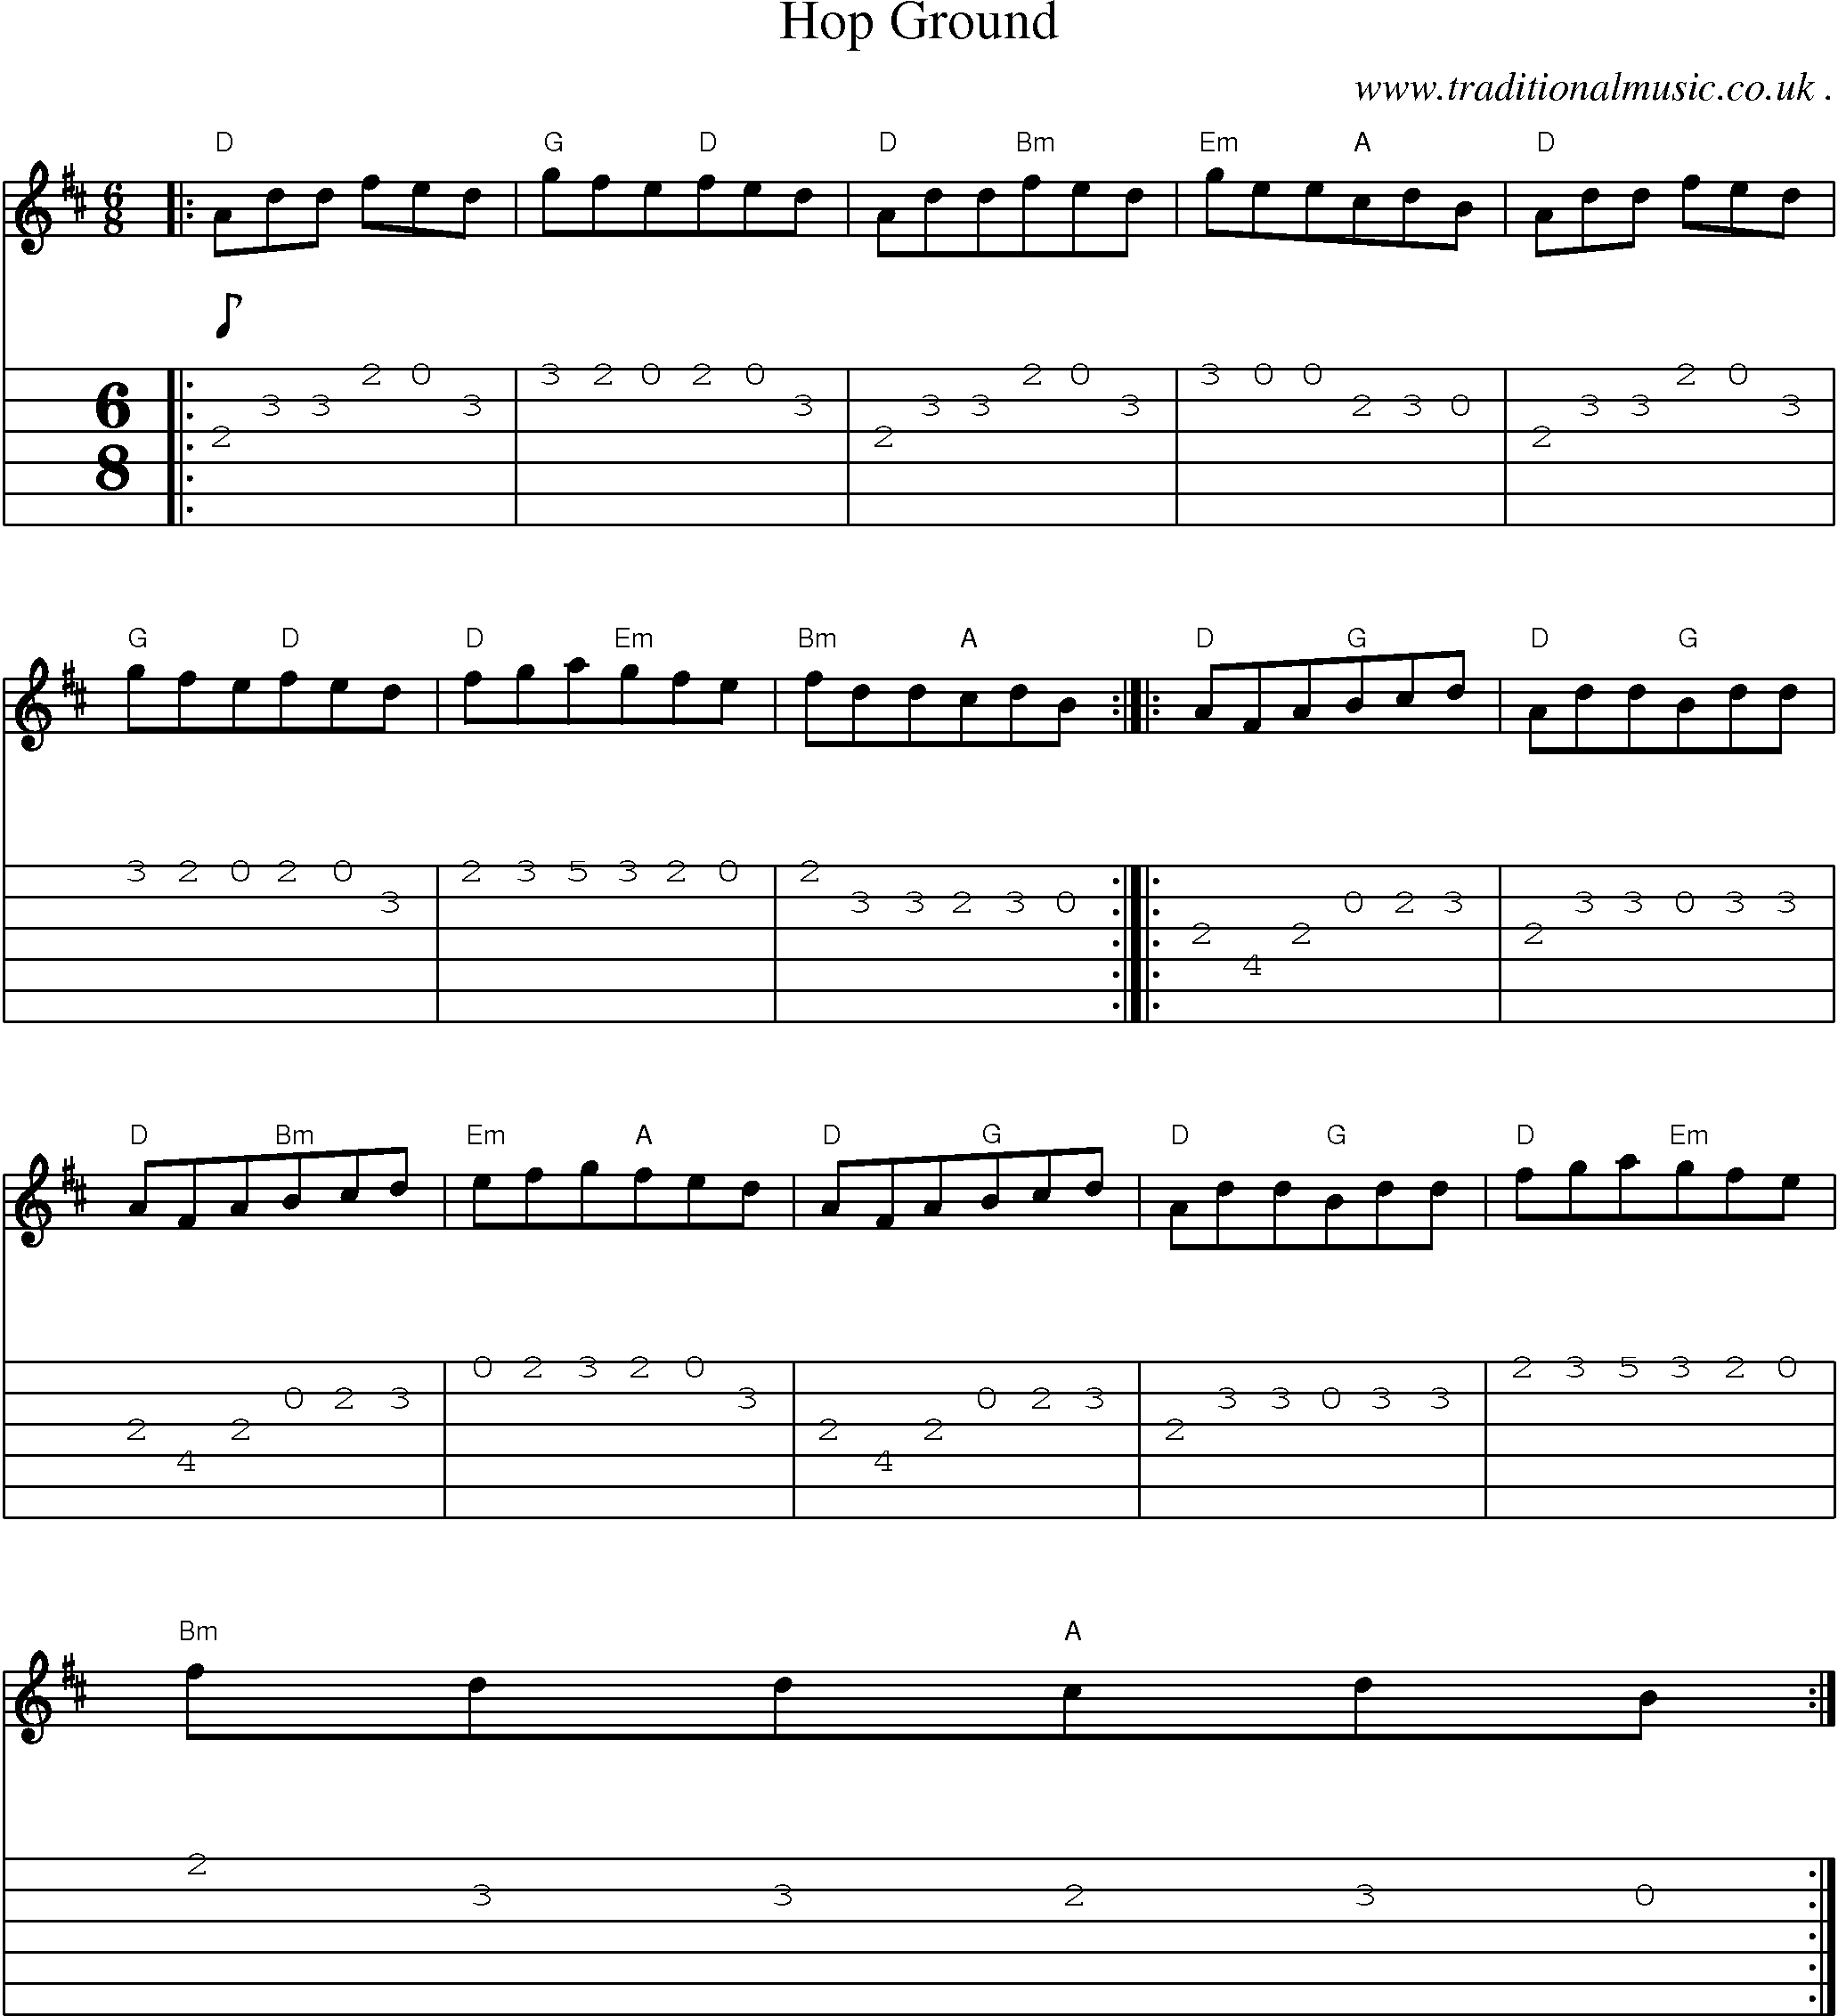 Sheet-Music and Guitar Tabs for Hop Ground